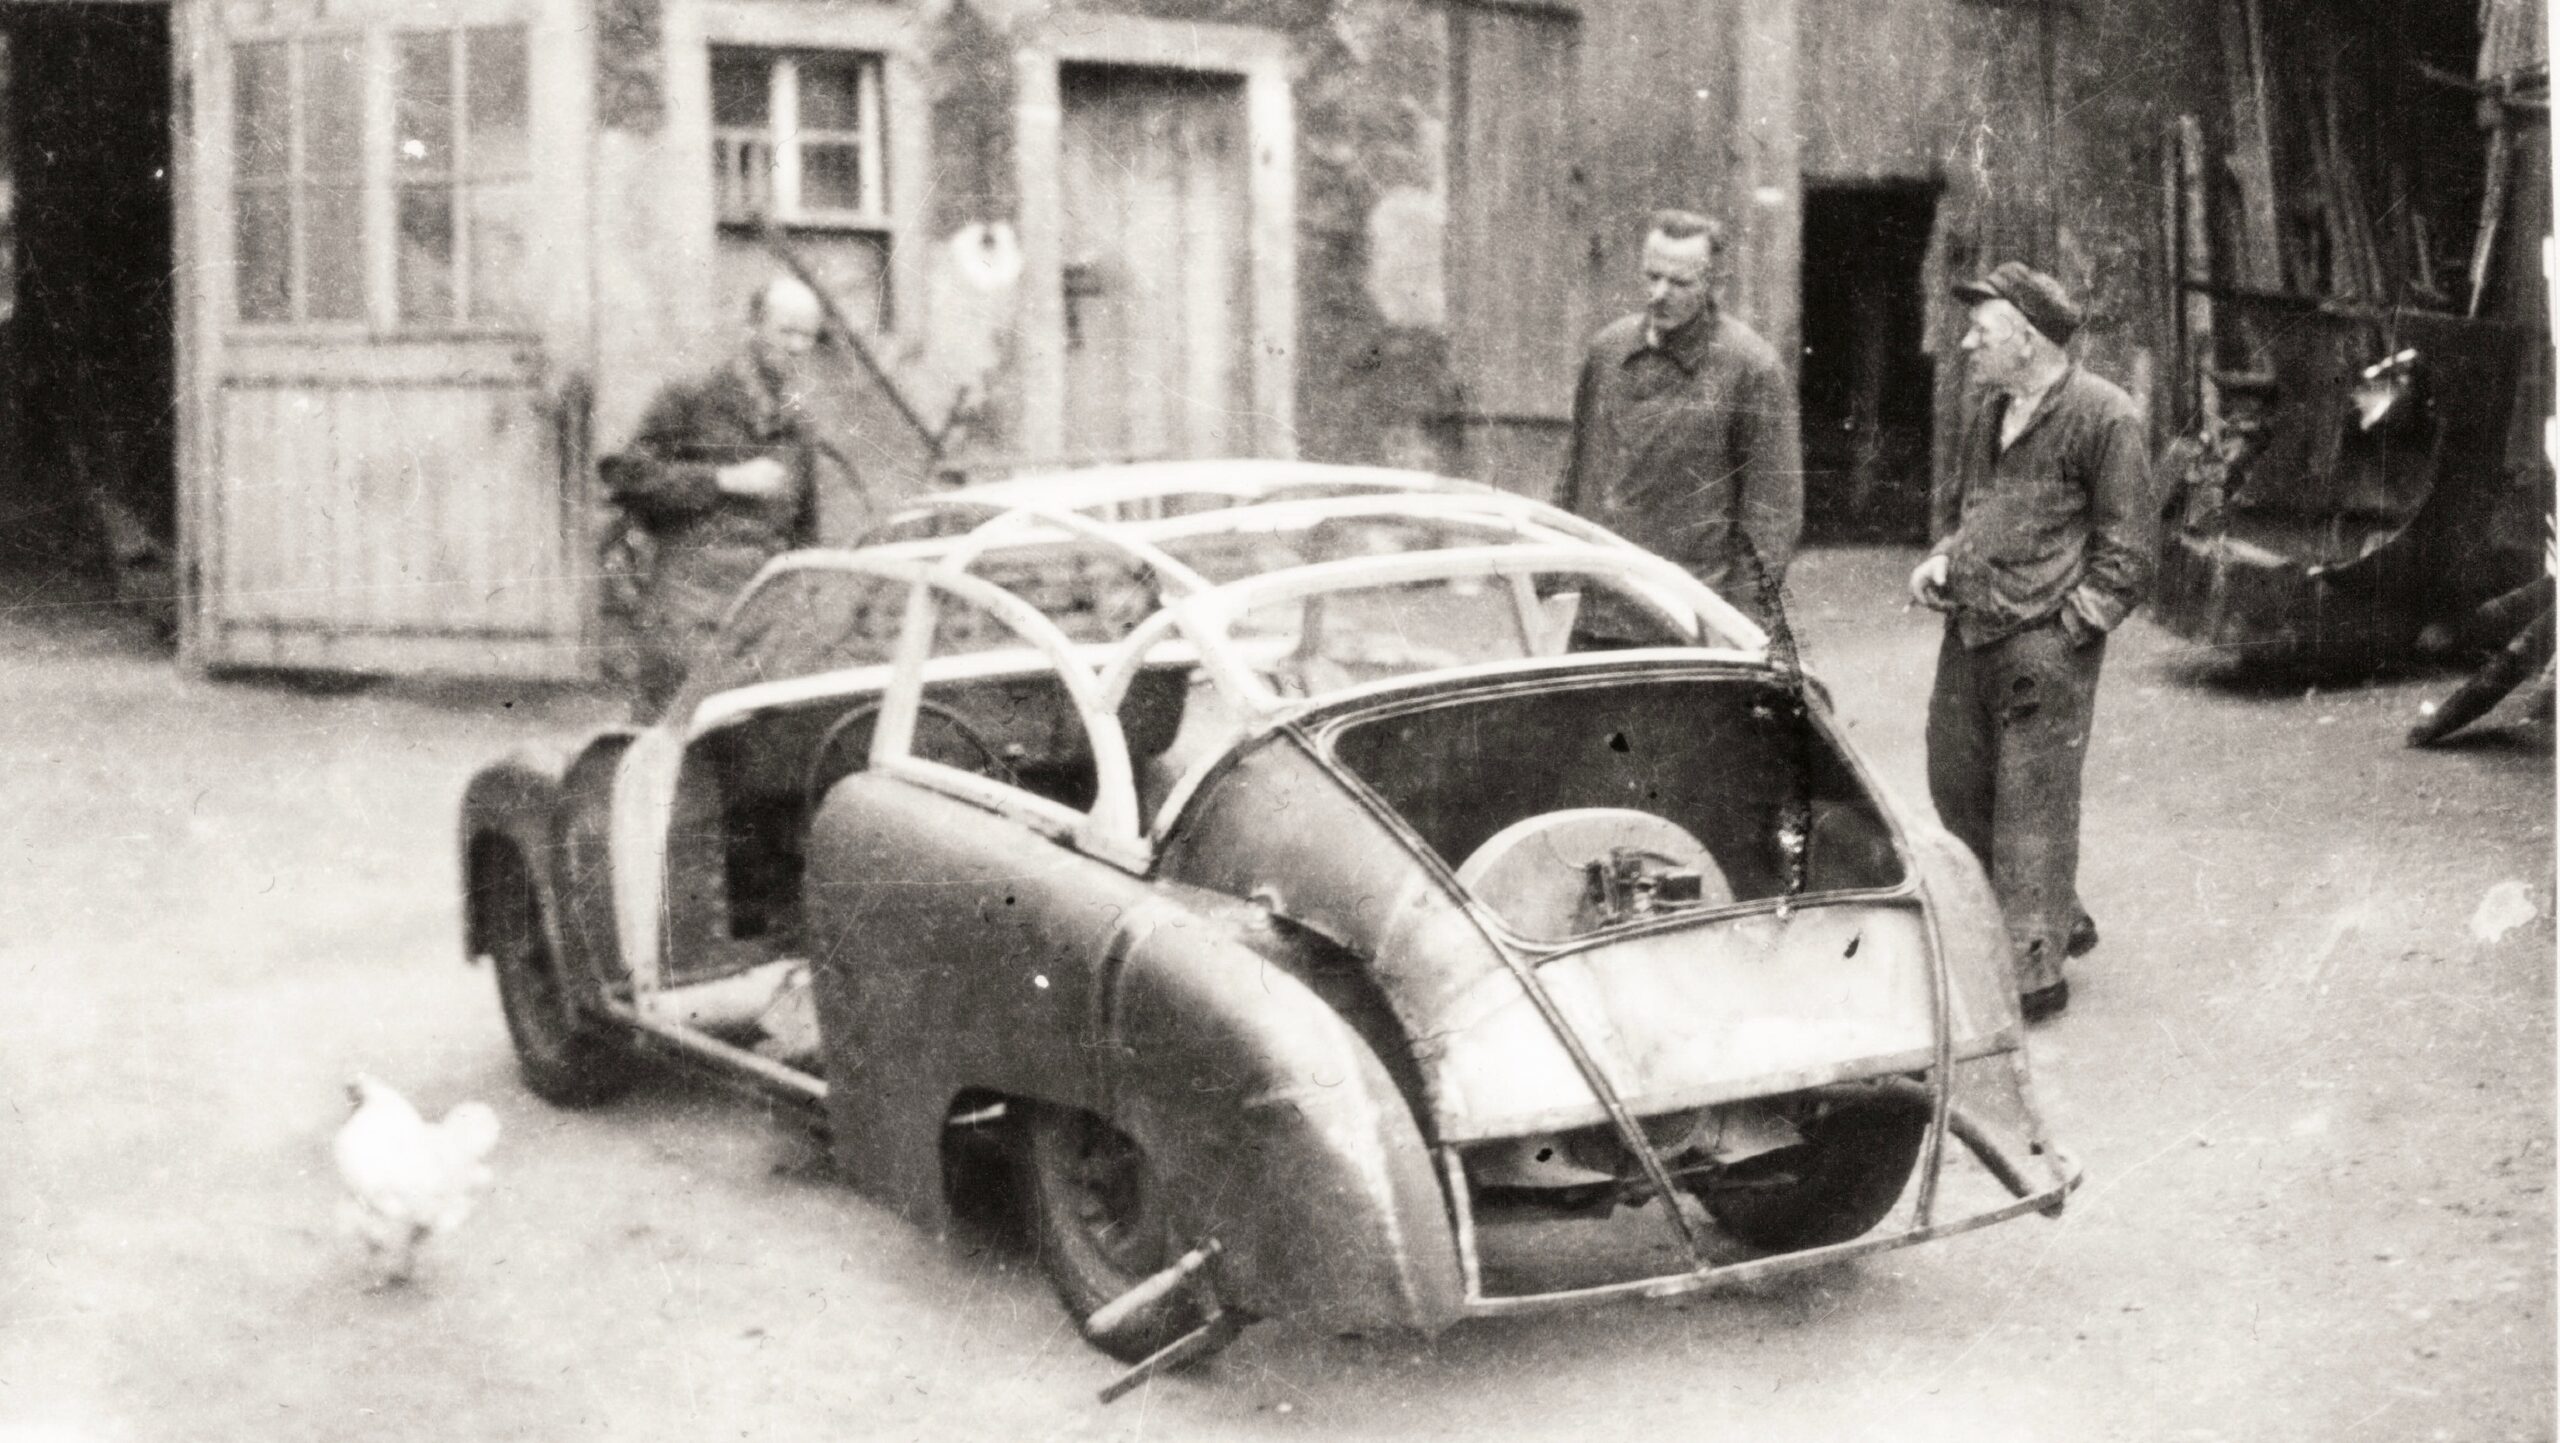 Ferry Porsche Unofficially Approved the First Replica 356 from the Pits at Le Mans